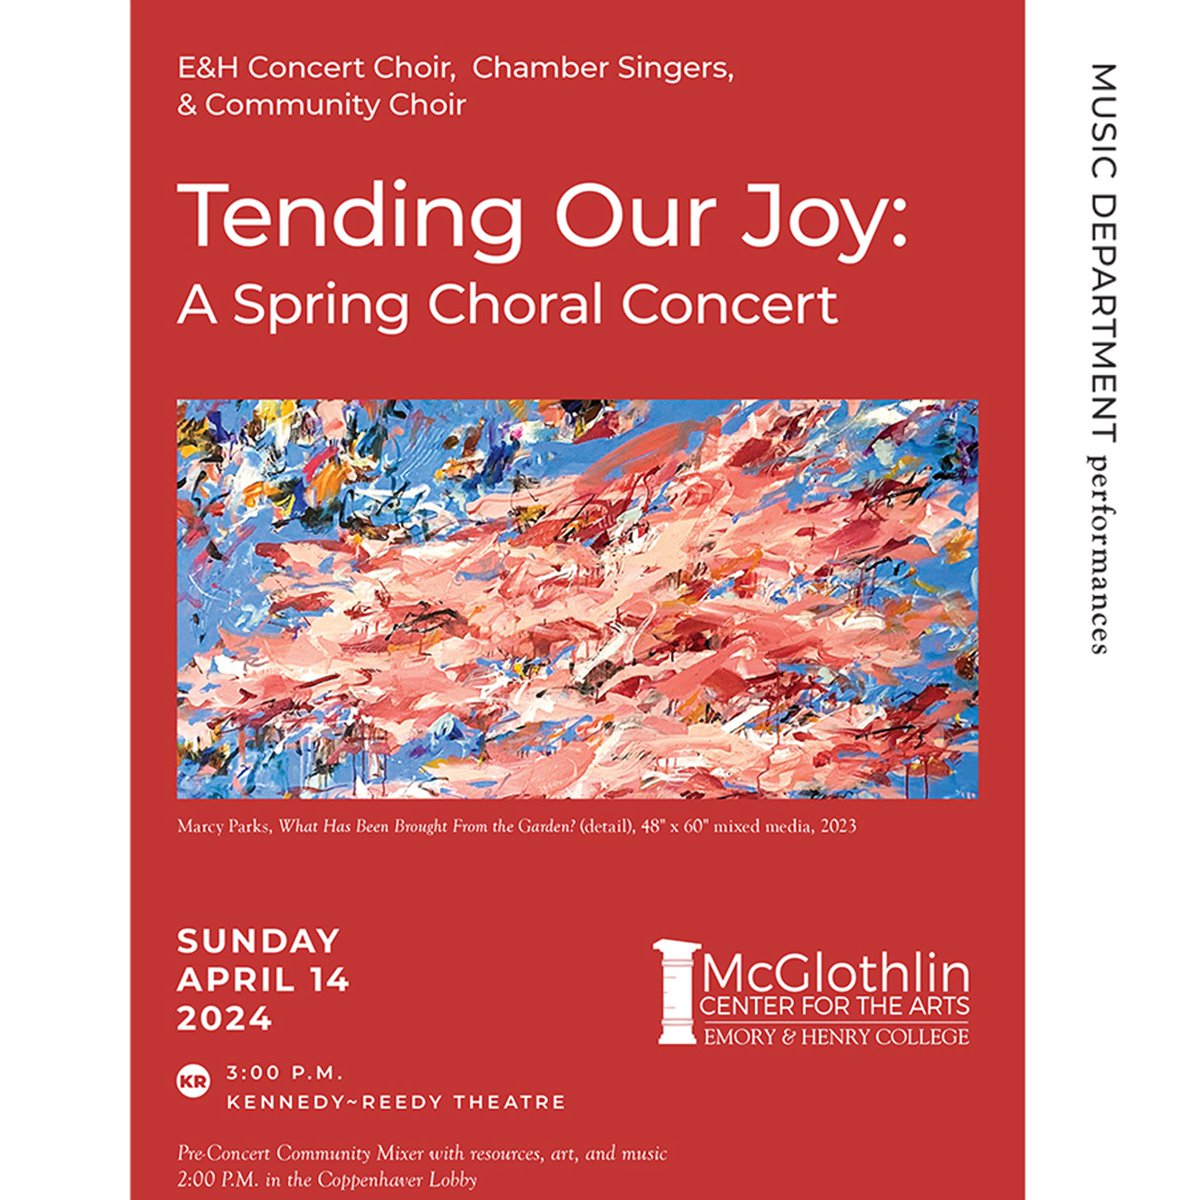 🎶This Sunday, April 14 at 3 p.m. the E&H Concert Choir, Chamber Singers and Community Choir present Tending Our Joy: A Spring Choral Concert in the Kennedy~Reedy Theatre of McGlothlin Center for the Arts. Join us for a 2 p.m. pre-show mixer. Tickets at ehc.edu/mcglothlincent…